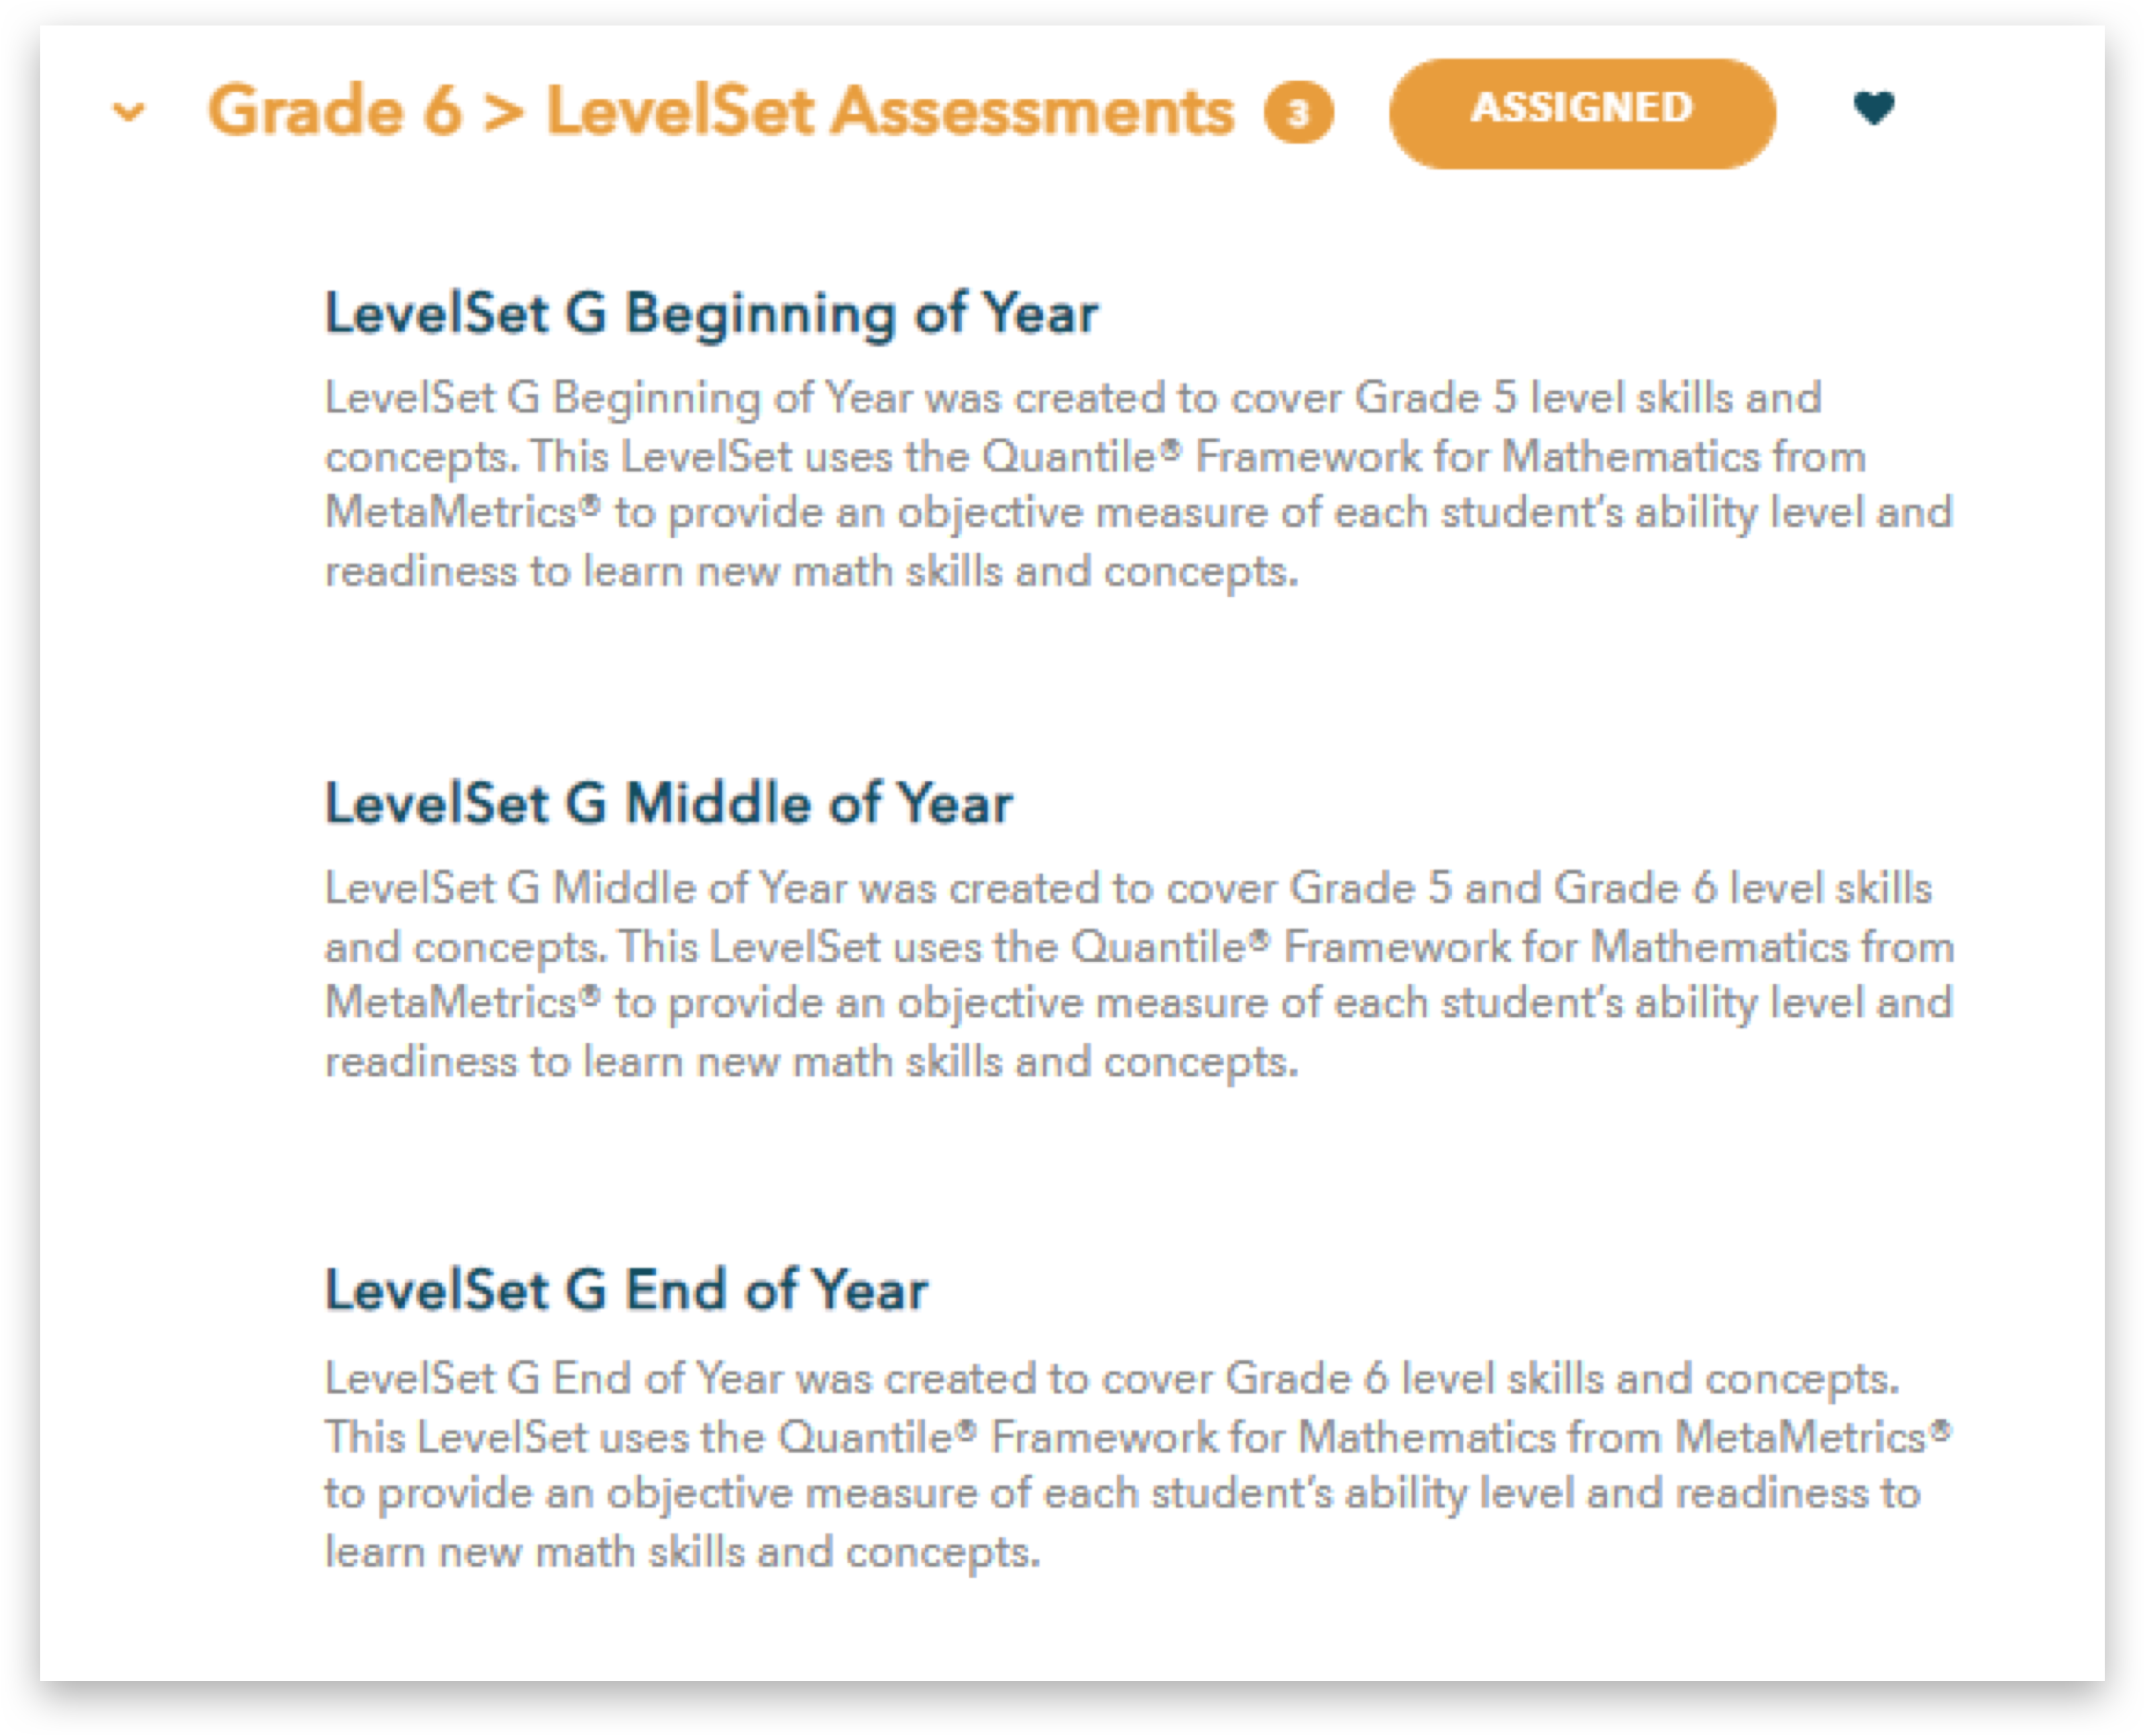 Grade 6 LevelSet Assessments 3, ASSIGNED, LevelSet G Beginning of Year LevelSet G Beginning of Year was created to cover Grade 5 level skills and concepts. This LevelSet uses the Quantile Framework for Mathematics from MetaMetrics to provide an objective measure of each student's ability level and readiness to learn new math skills and concepts. LevelSet G Middle of Year LevelSet G Middle of Year was created to cover Grade 5 and Grade 6 level skills and concepts. This LevelSet uses the Quantile® Framework for Mathematics from MetaMetrics to provide an objective measure of each student's ability level and readiness to learn new math skills and concepts. LevelSet G End of Year LevelSet G End of Year was created to cover Grade 6 level skills and concepts. This LevelSet uses the Quantile® Framework for Mathematics from MetaMetricsⓇ to provide an objective measure of each student's ability level and readiness to learn new math skills and concepts.